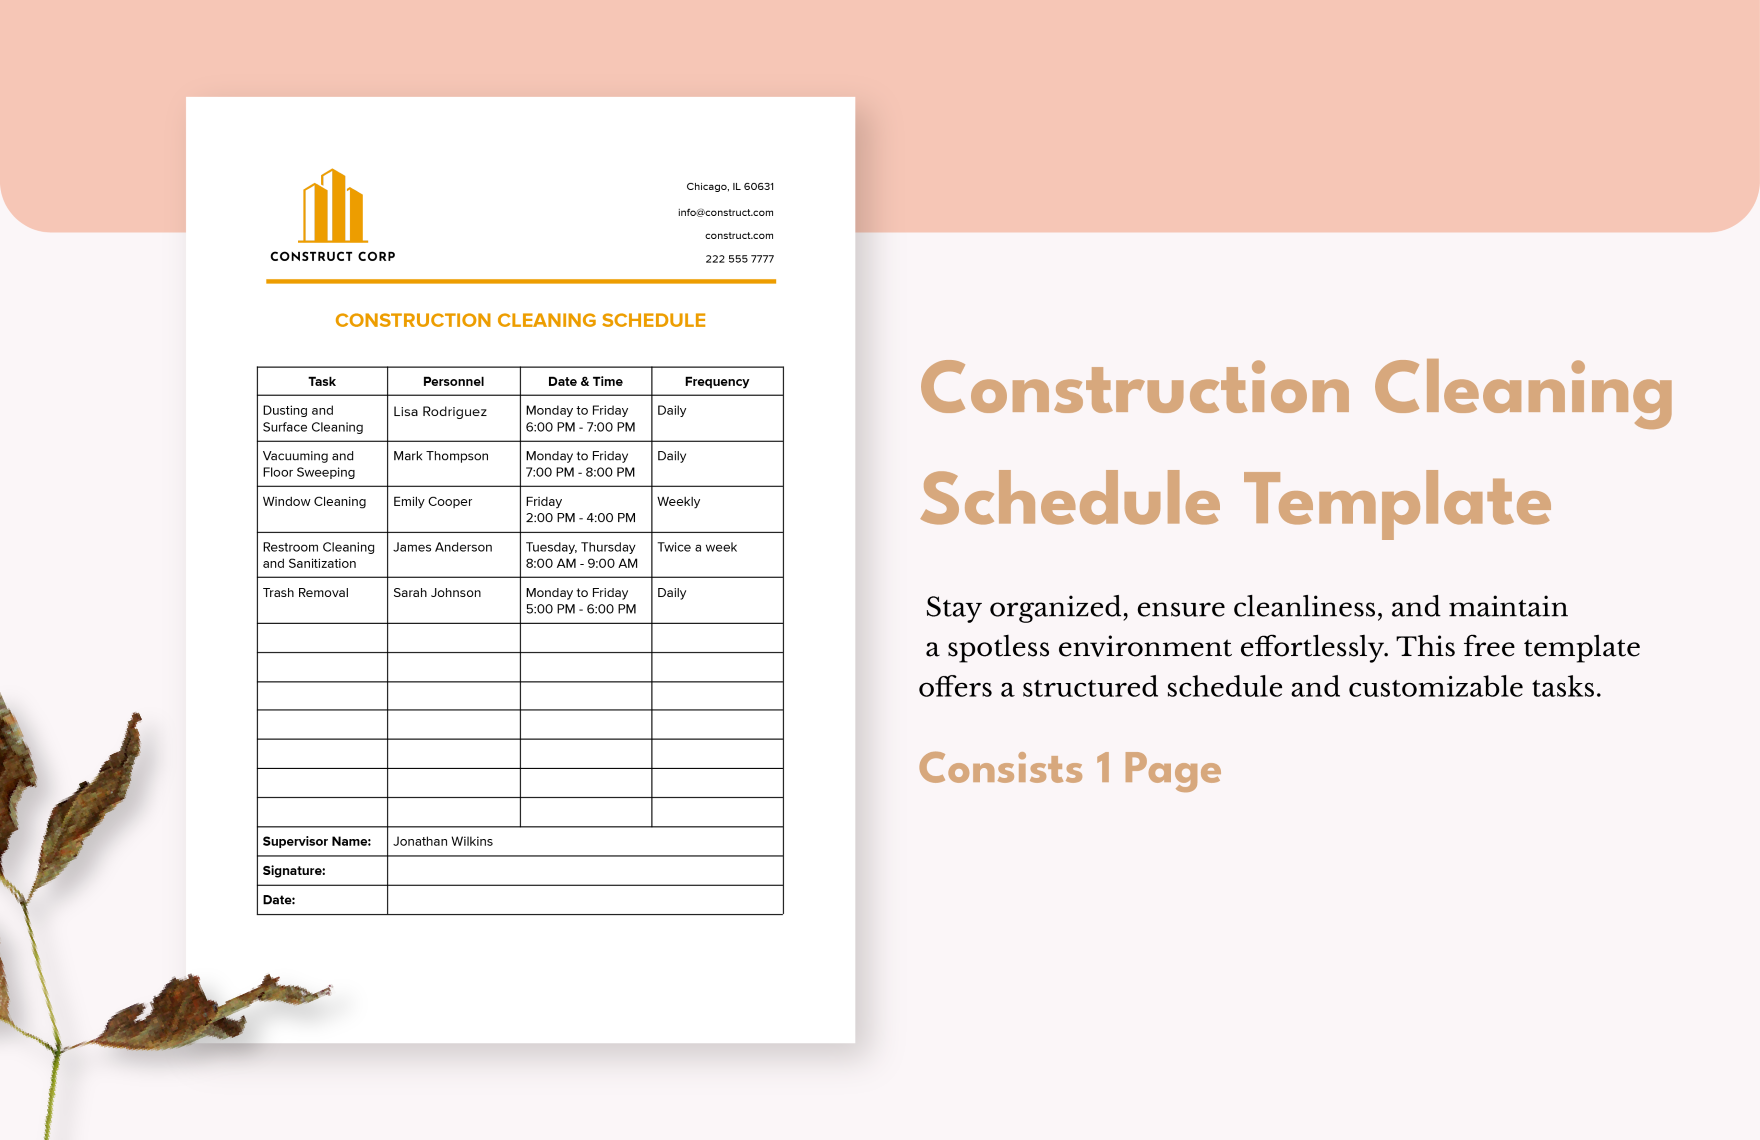 Construction Cleaning Schedule Template